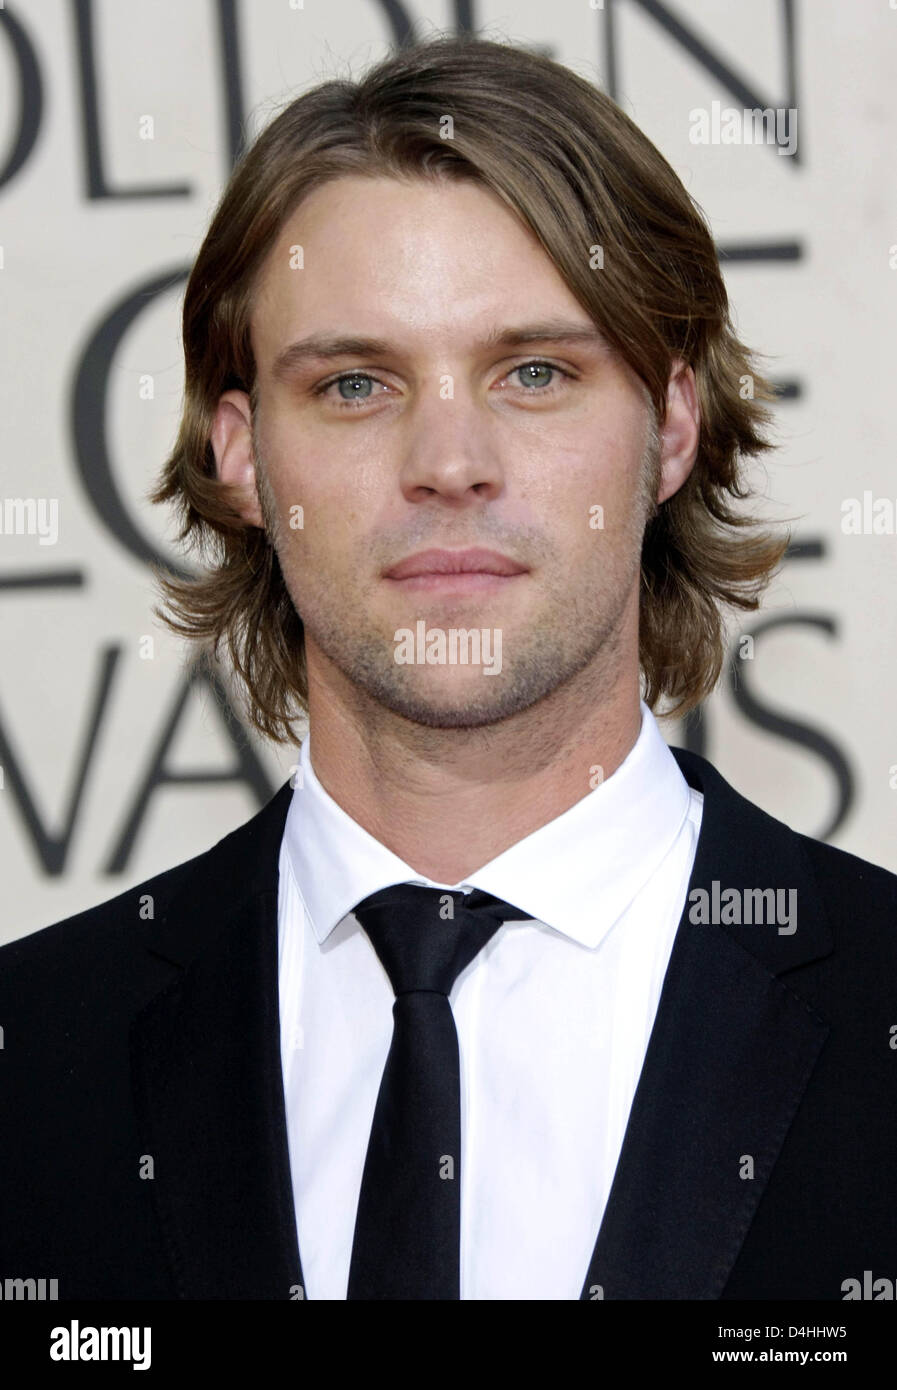 Actor Jesse Spencer arrives for the 66th Annual Golden Globe Awards at the Beverly Hilton Hotel in Beverly Hills, California, USA, 11 January 2009. The Golden Globes honour excellence in film and television. Photo: Hubert Boesl Stock Photo